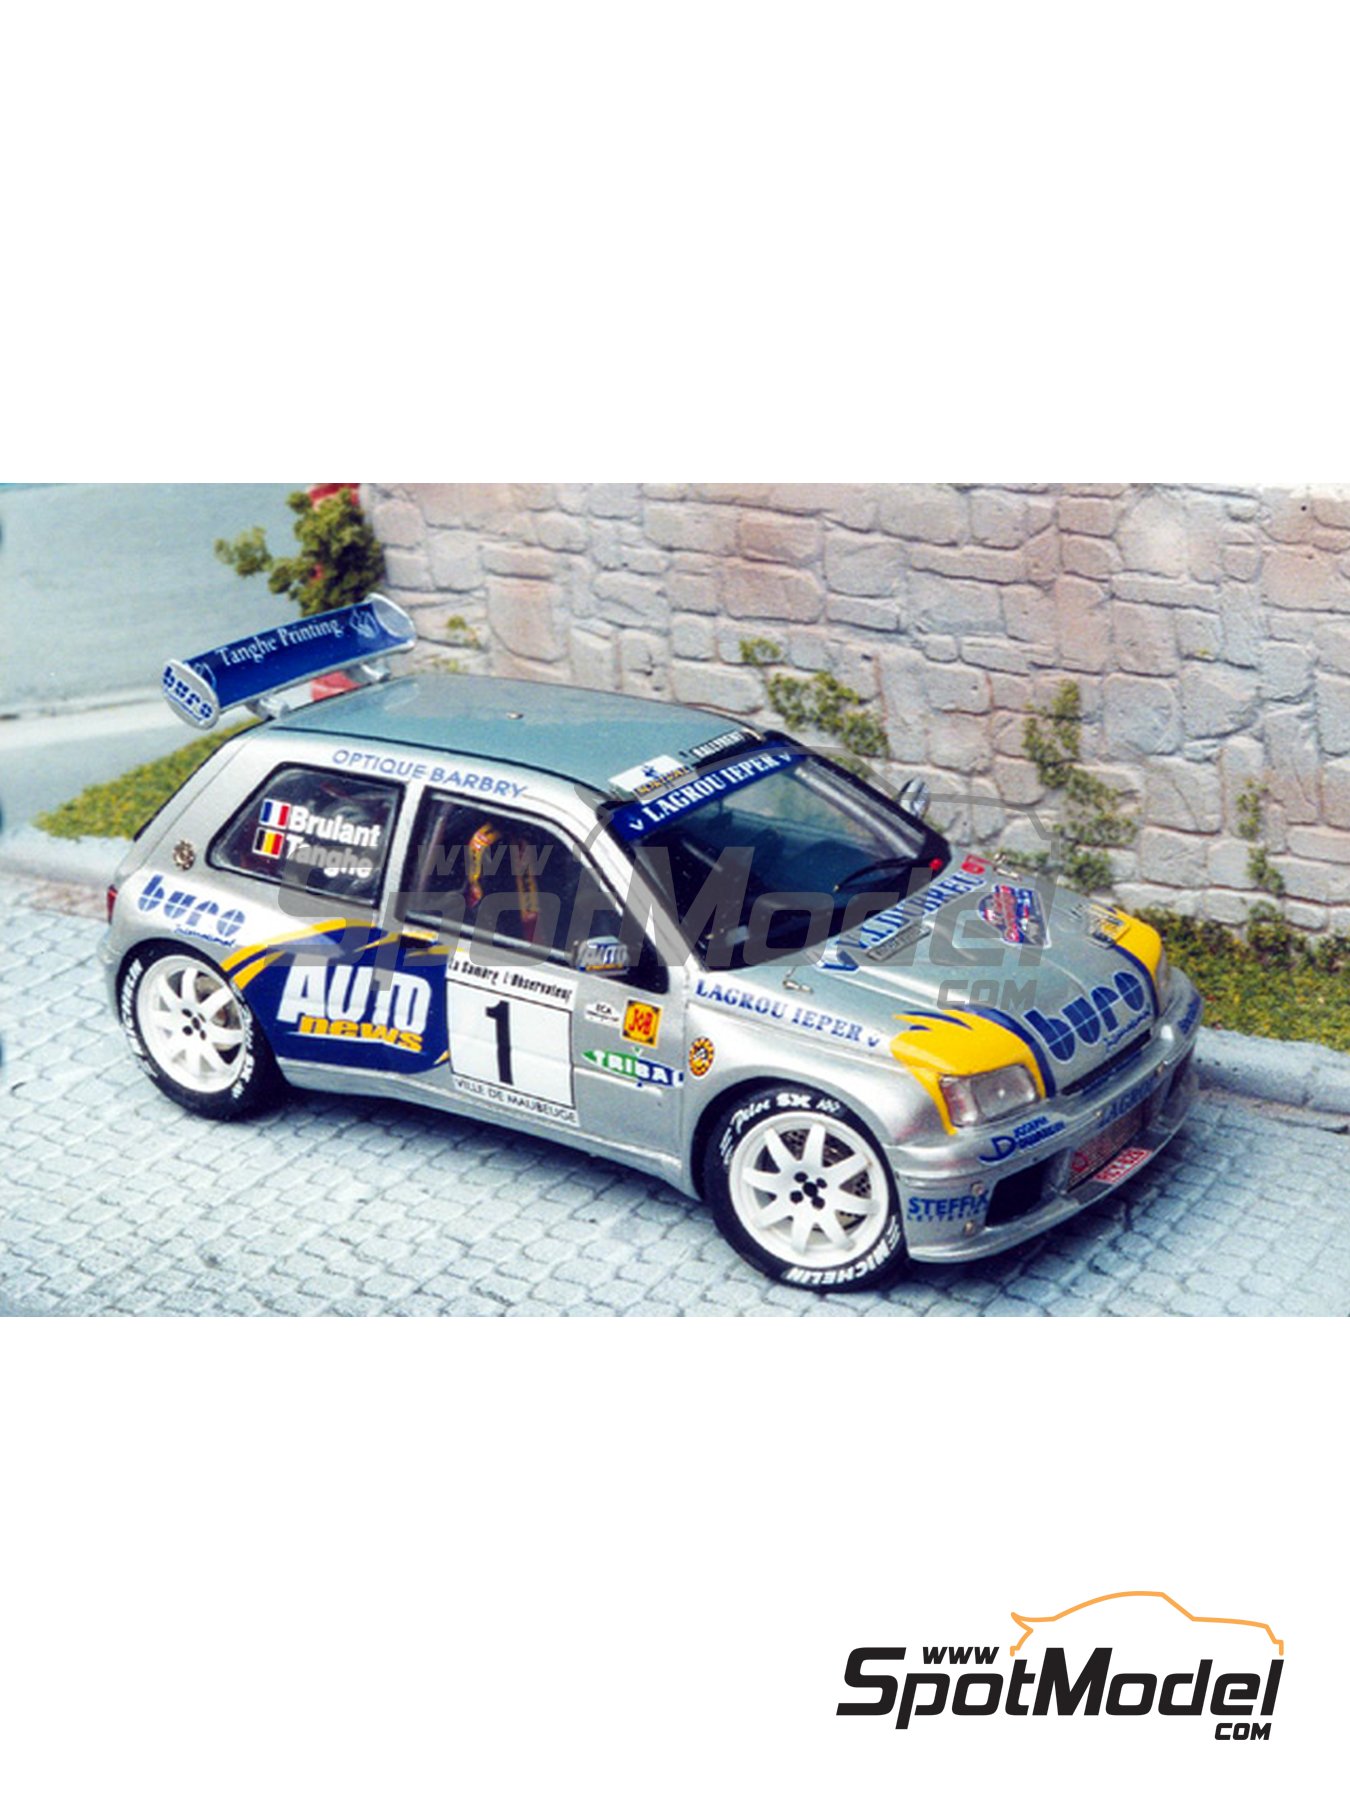 DECALS 1/43 REF 2301 RENAULT CLIO MAXI KIT CAR MUNSTER BOUCLES DE SPA 1995 RALLY 